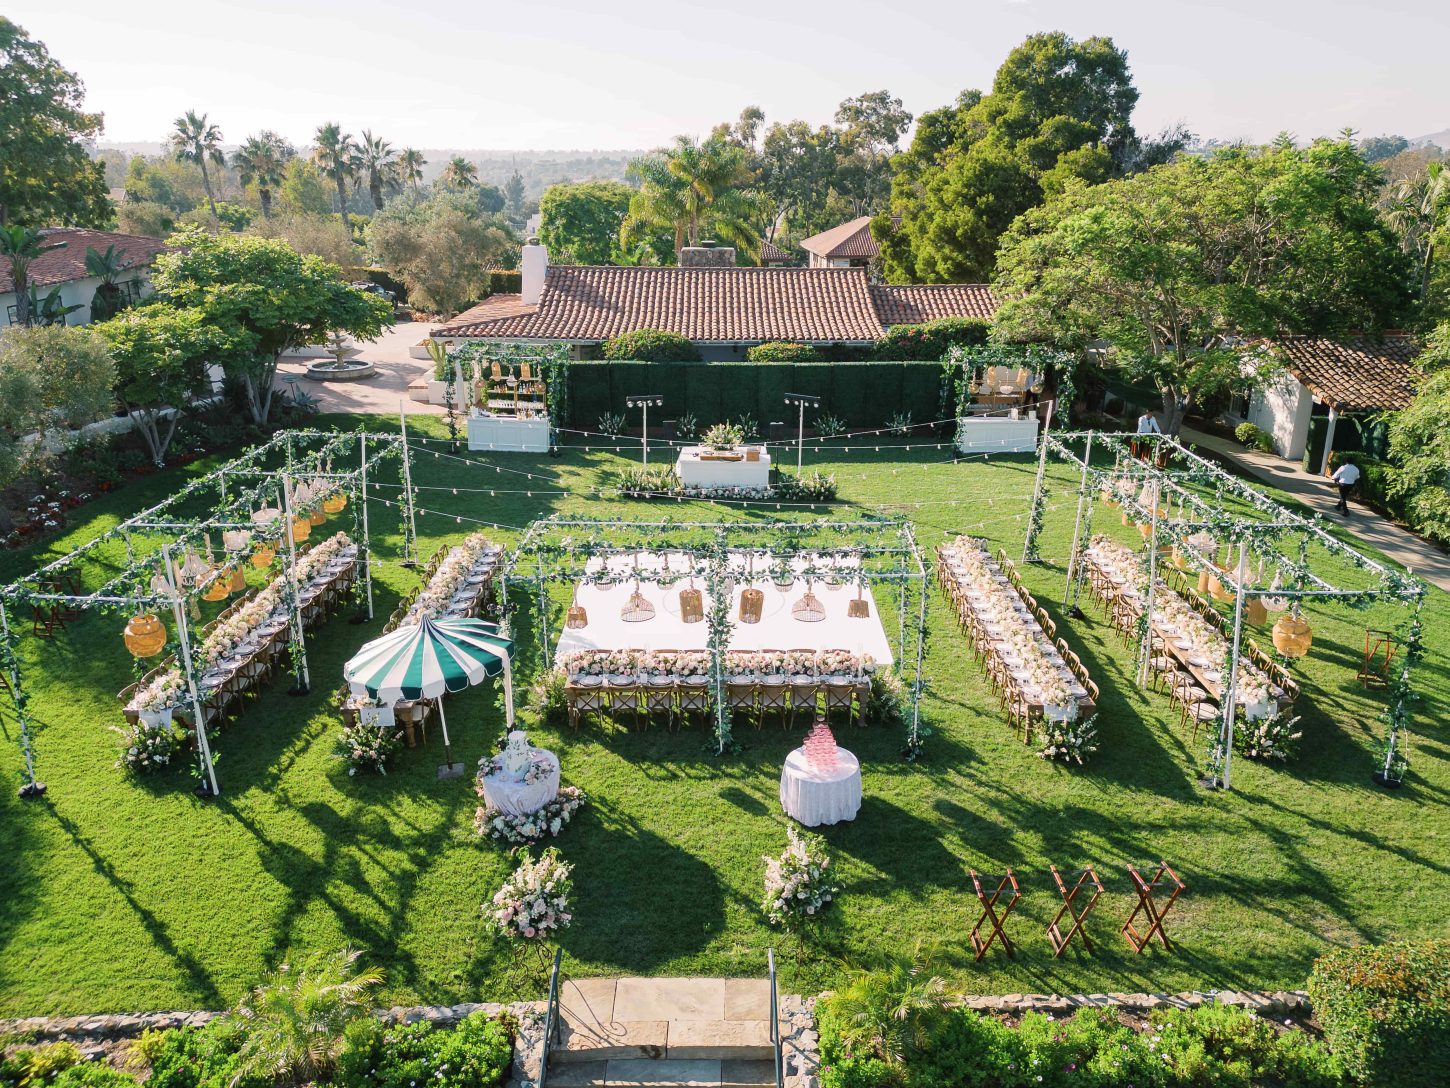 Aerial view of the Croquet Lawn set up and decorated for a wedding